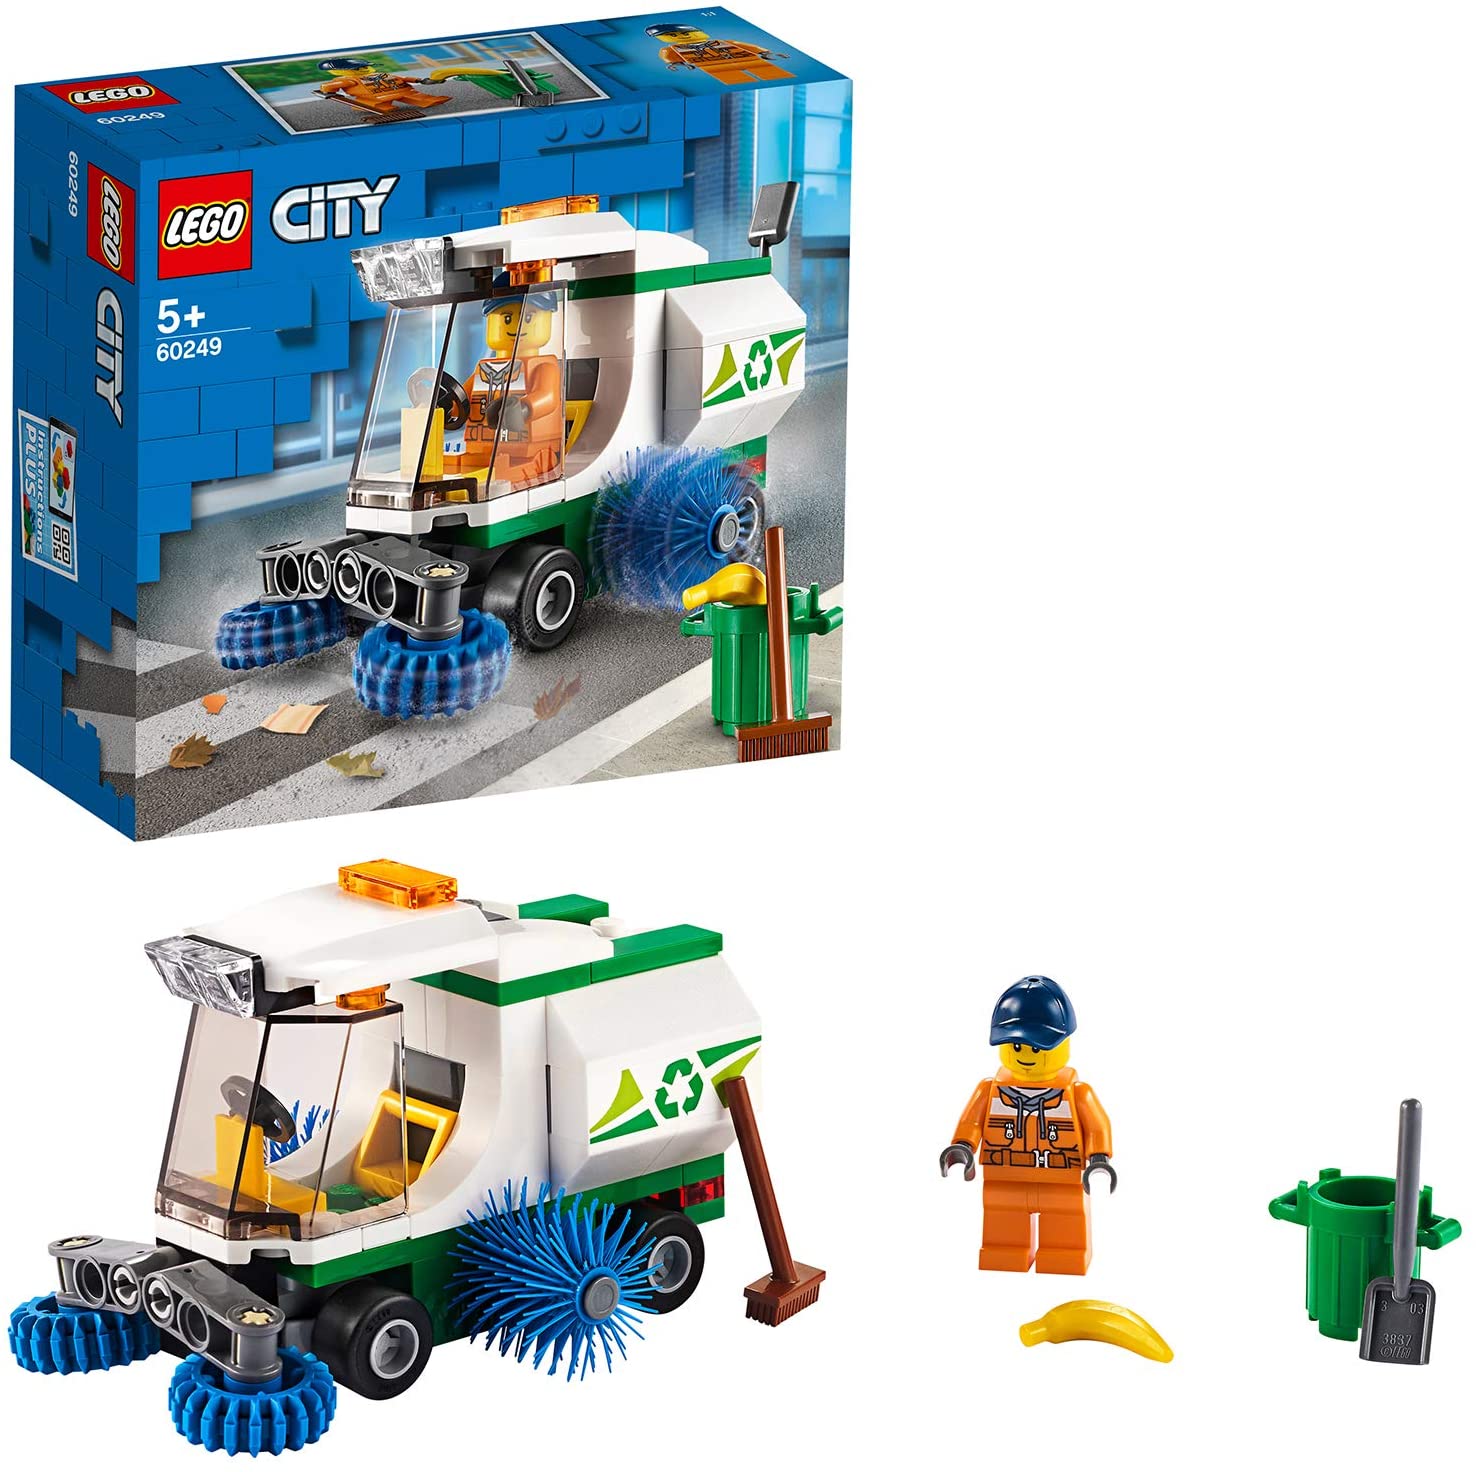 Lego 60249 City Road Sweeper Kit For Children 5 Years And Up